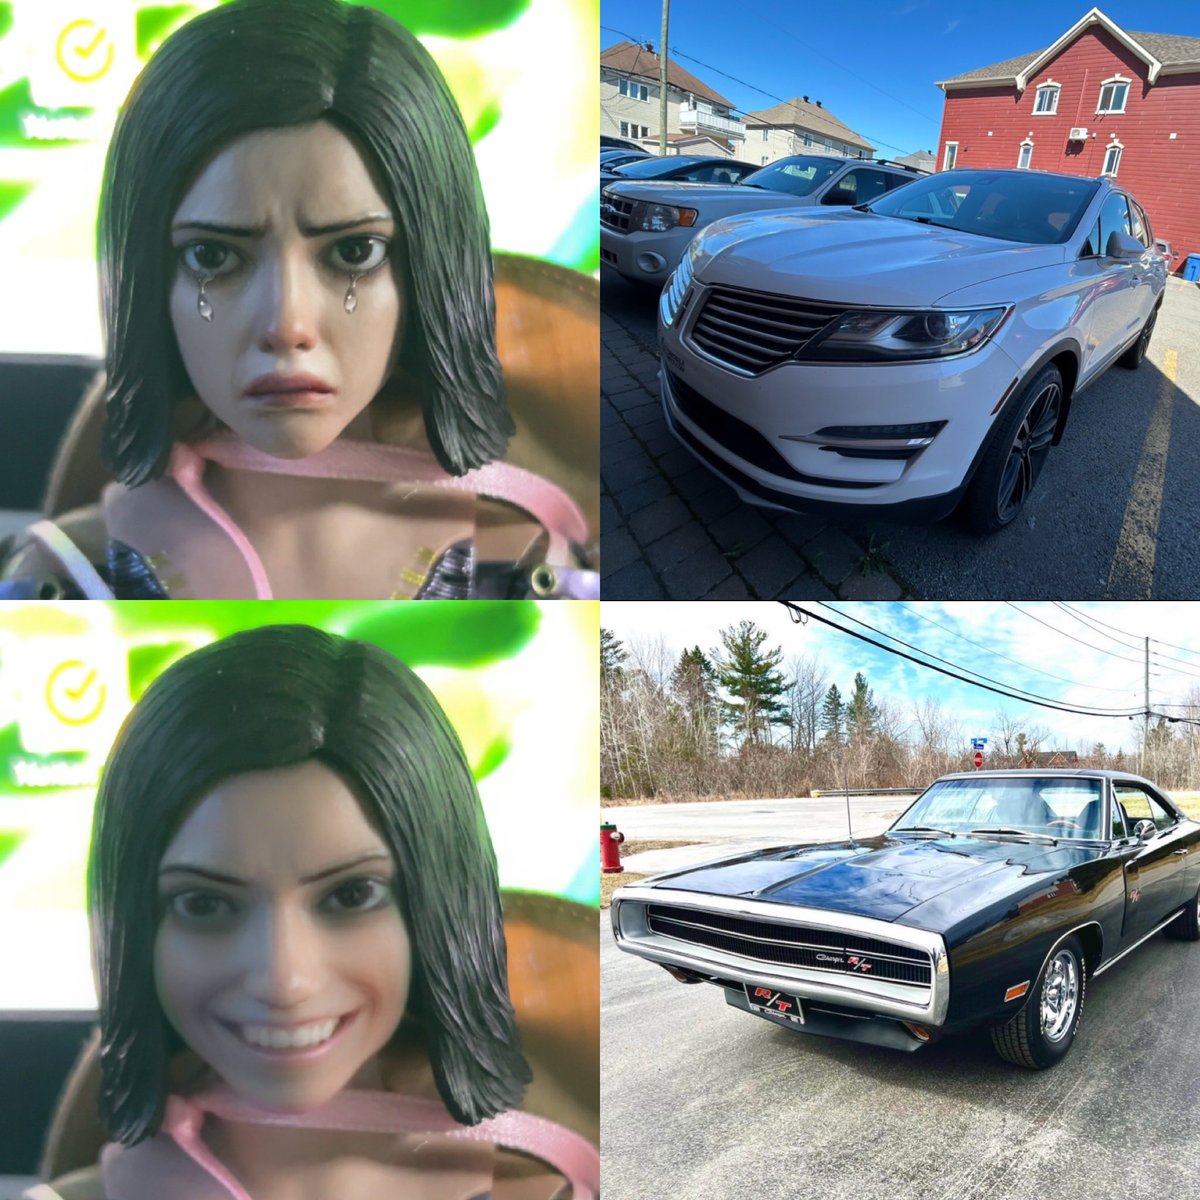 Alita knows what is a good car . 😬✌️❤️ #AlitaArmy #HotToysAlita #AlitaMeme #Charger #1970 #ClassicCars #AlitaSequels